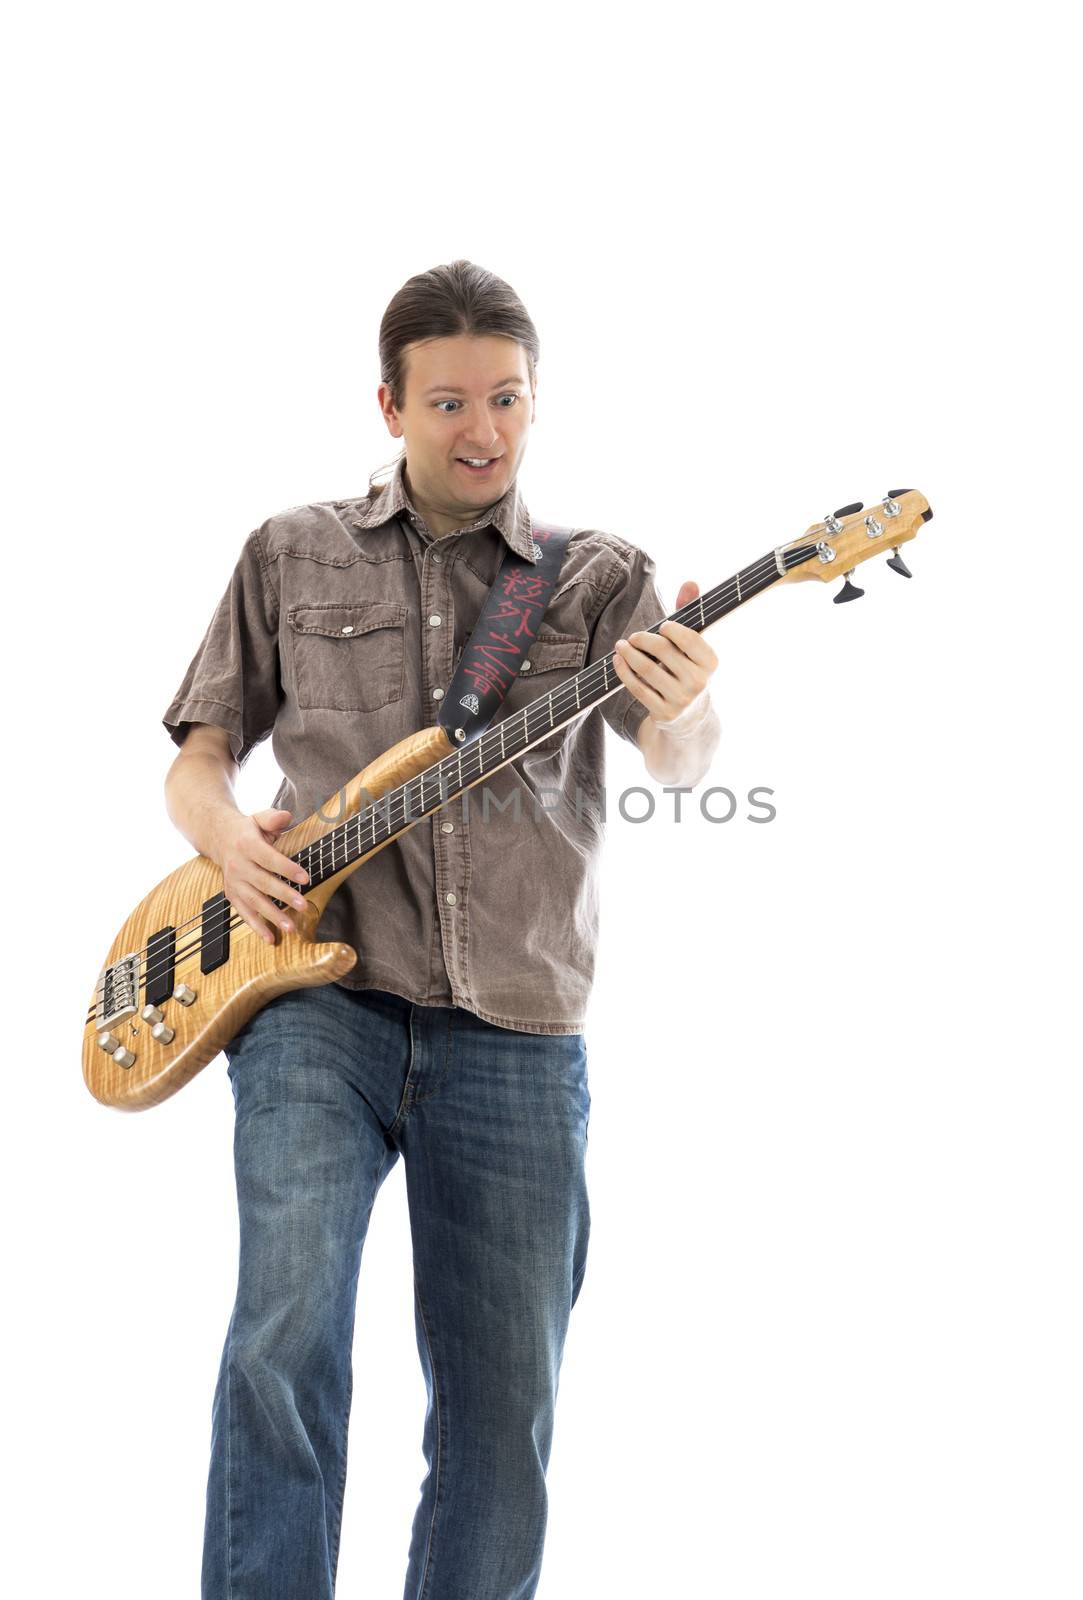 Bass guitarist with a funny look playing his bass guitar (Series with the same model available)